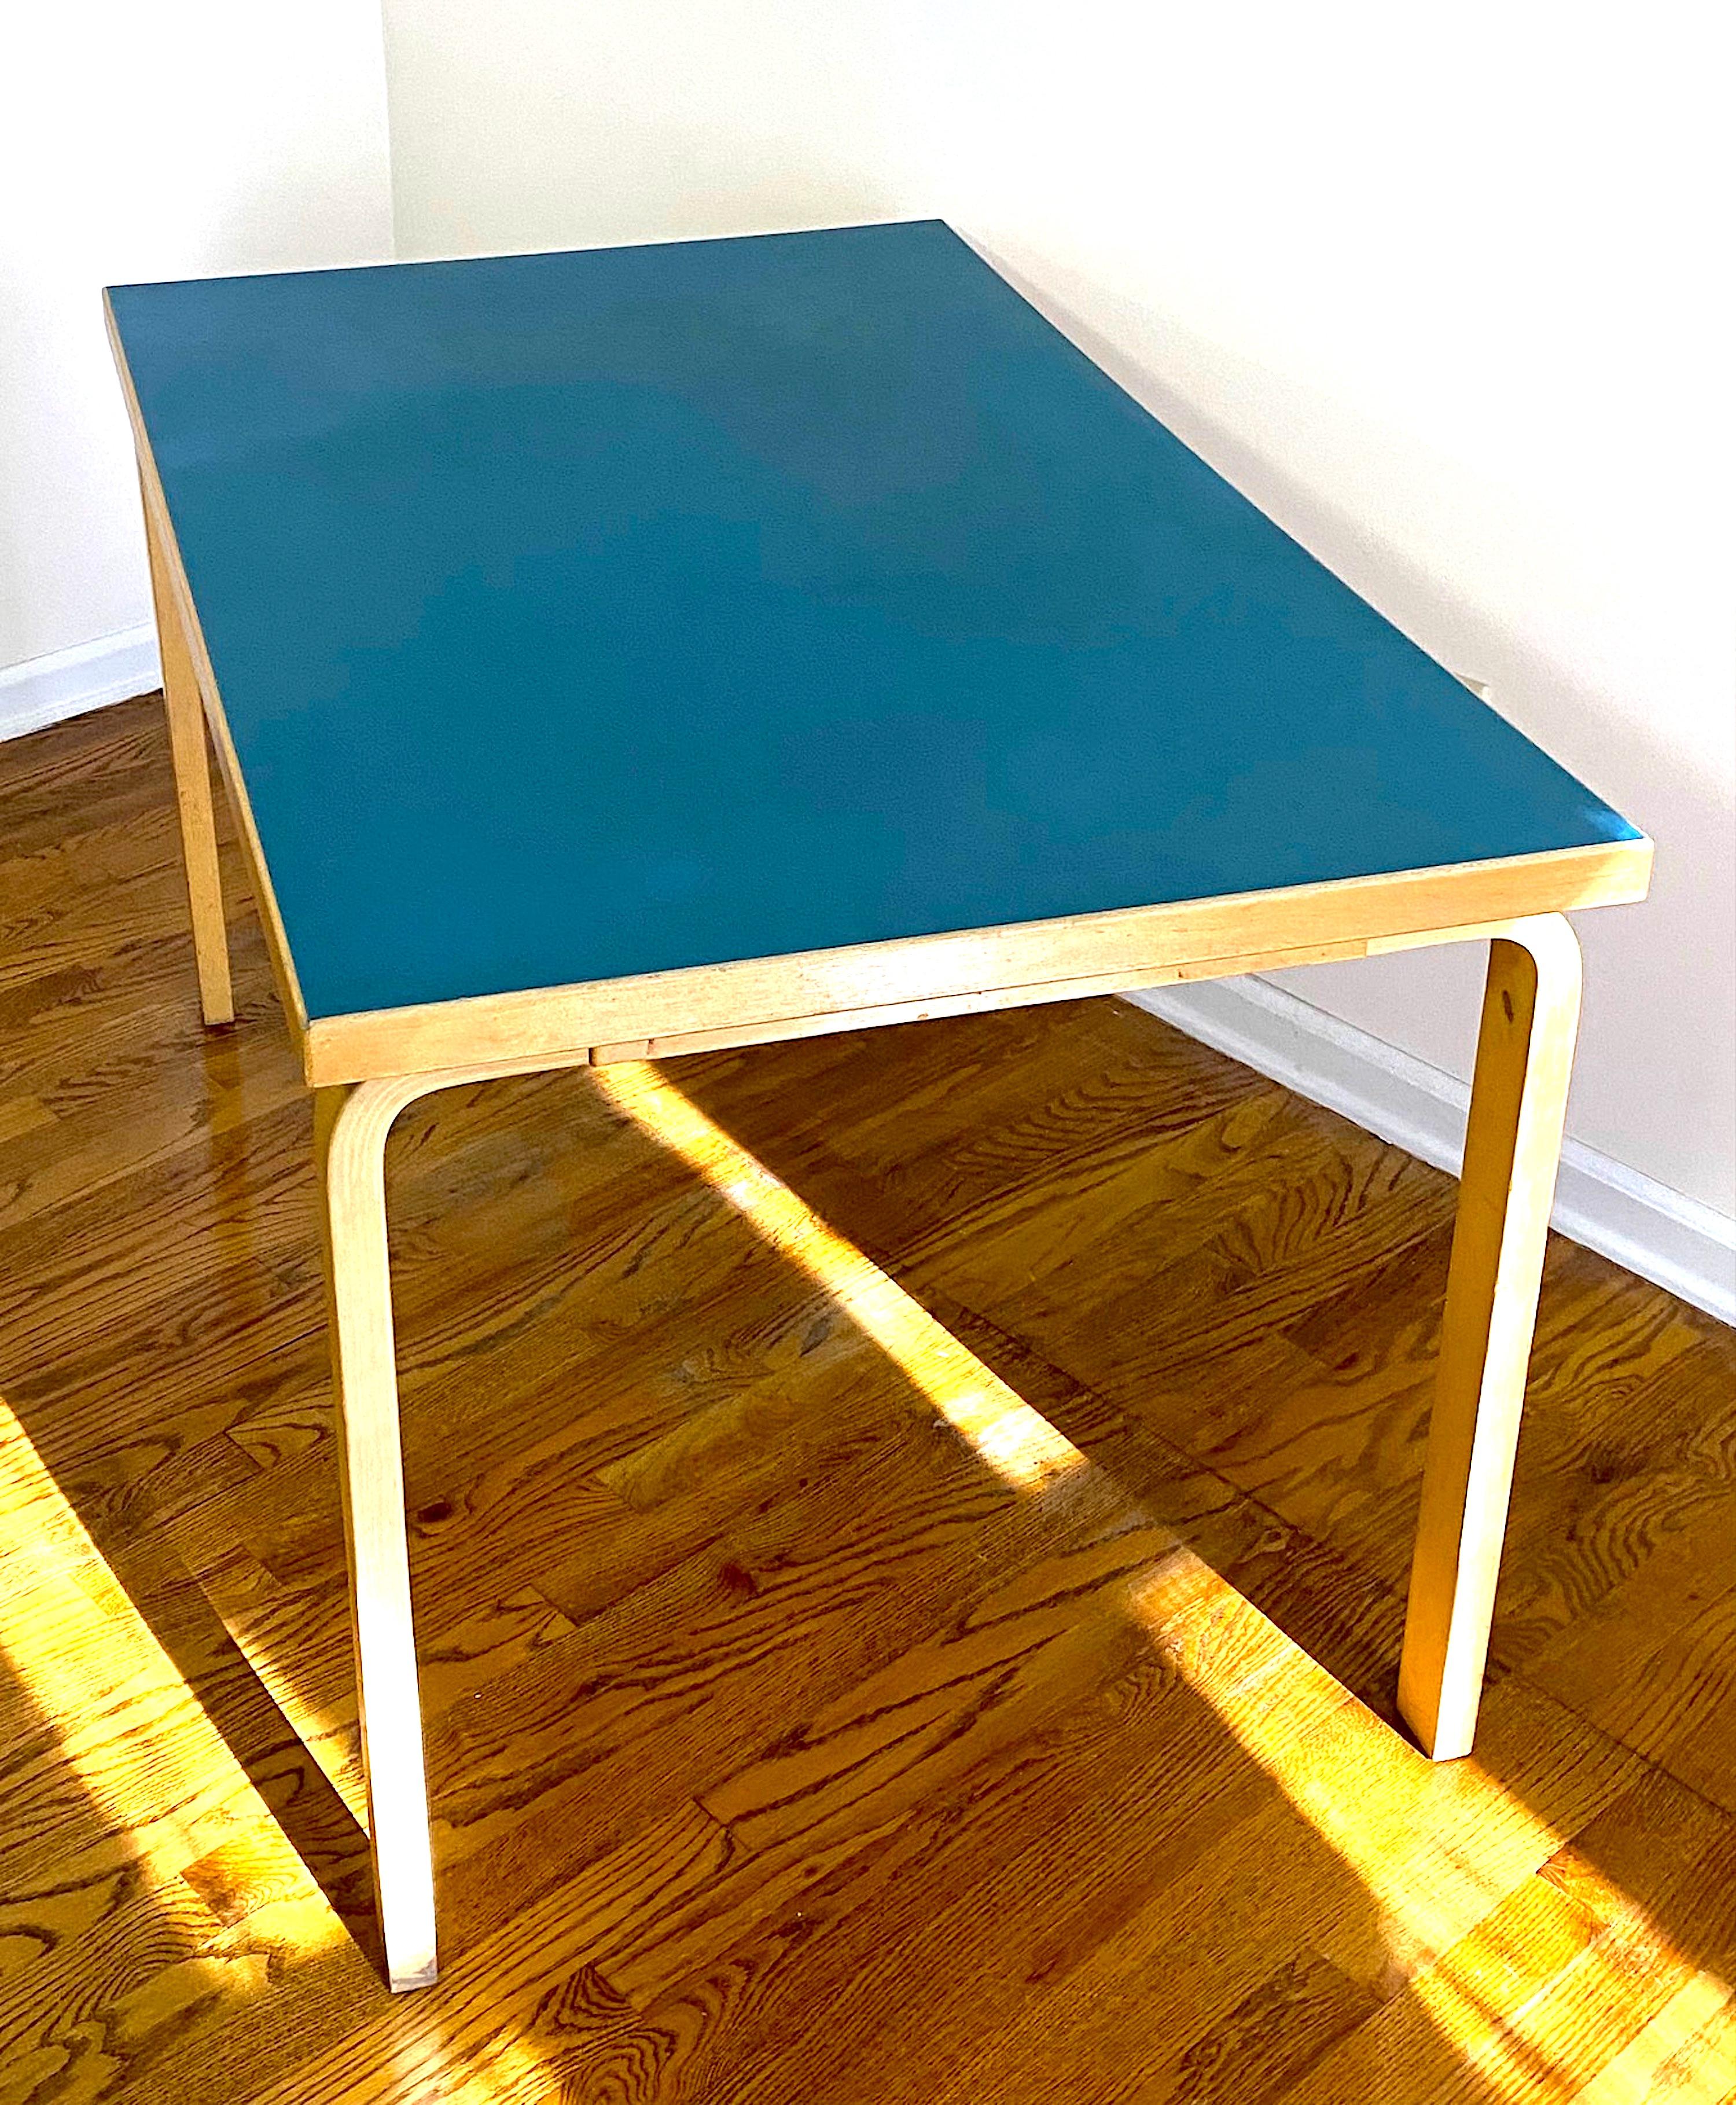 A fine example of bauhaus design by Finnish designer Alvar Aalto, this birch bent leg table has the original and no longer available blue linoleum top dating it to the later 1950s. It is bent Birch wood with a blue linoleum top and measures 48